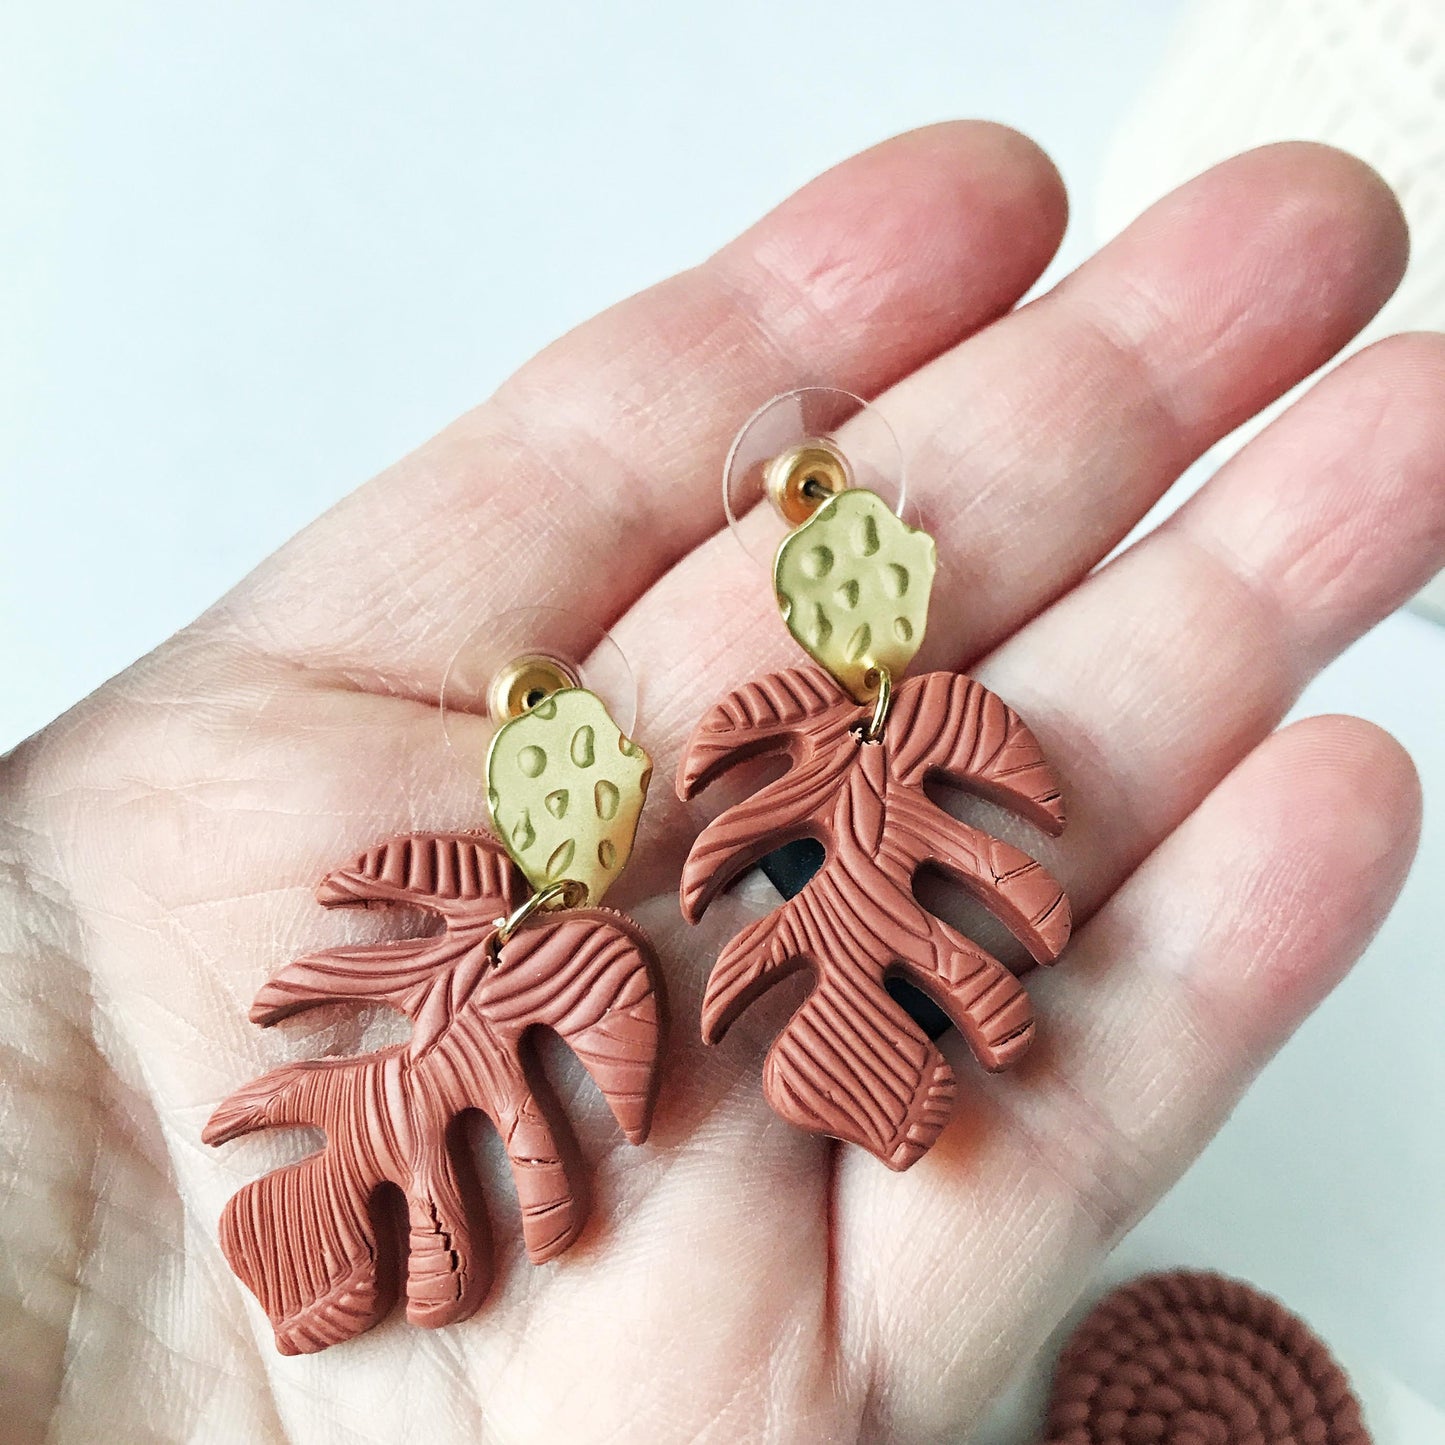 KellyMack.Co Polymer Clay Texture Leaf Earrings w/Gold Post